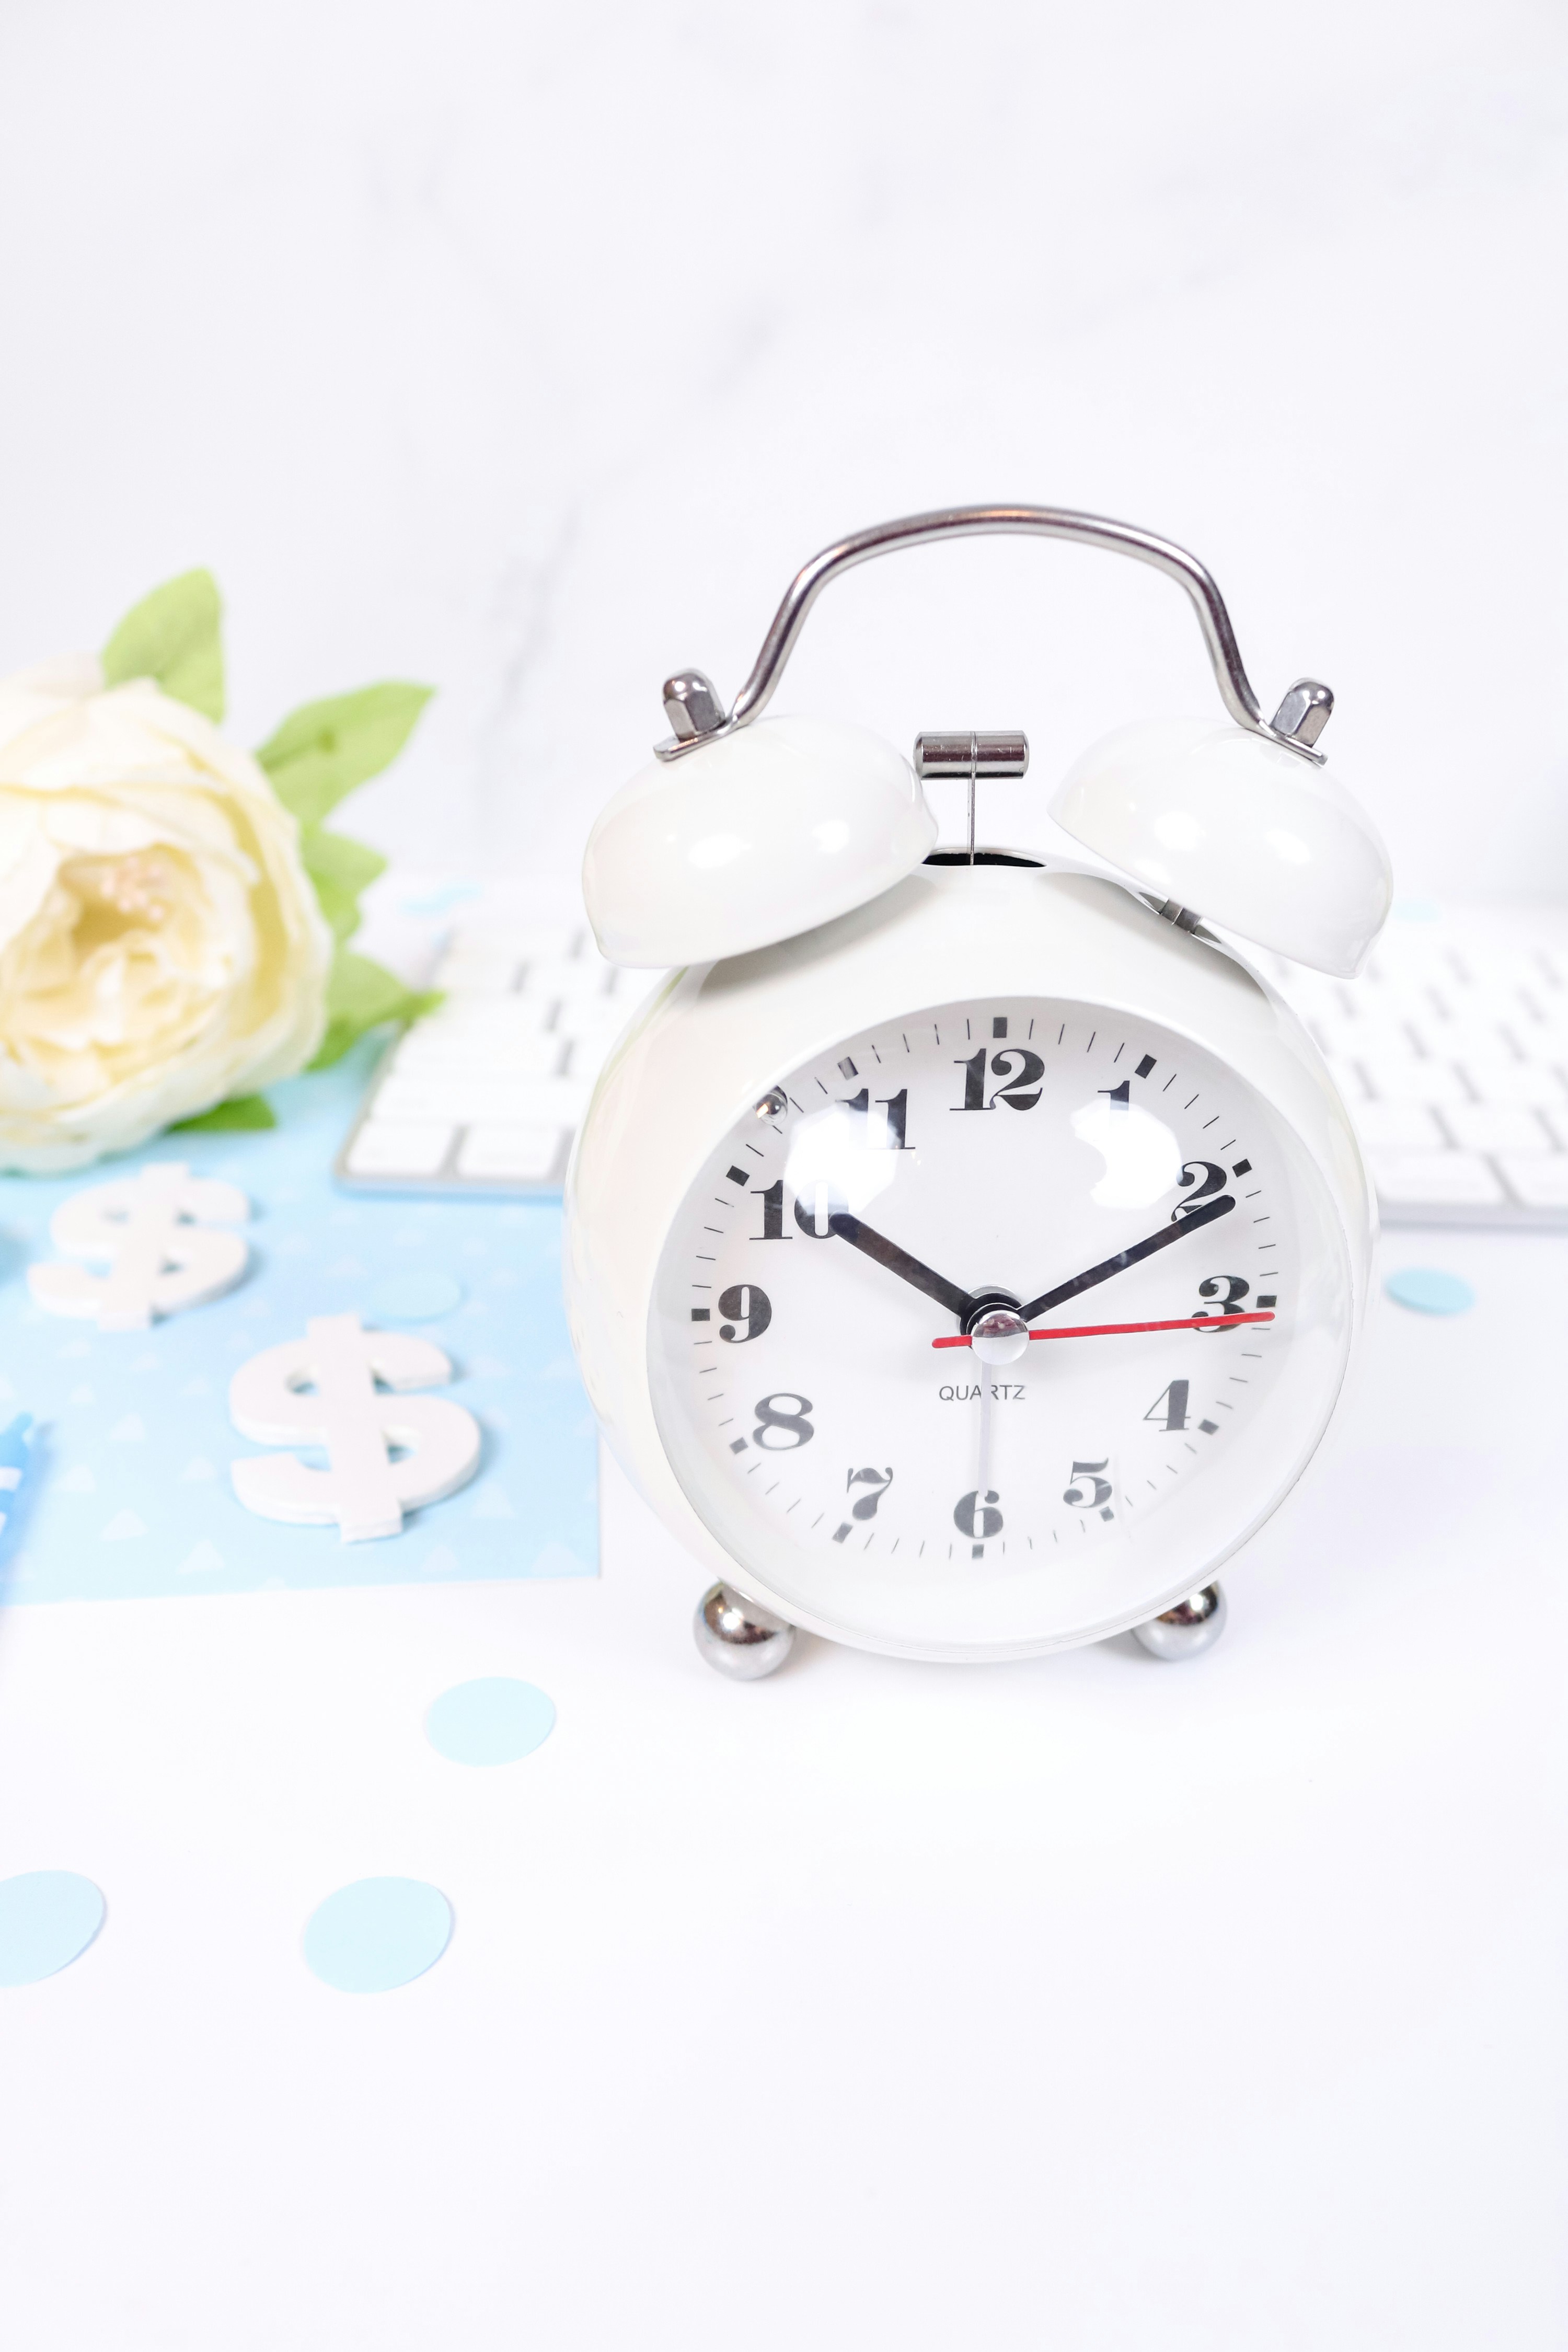 This feminine flat lay styled stock photo features a white desk with light blue and dark blue props like a keyboard, white flowers, markers, confetti, a clock for keeping track of time or representing productivity for entrepreneurs, and more.